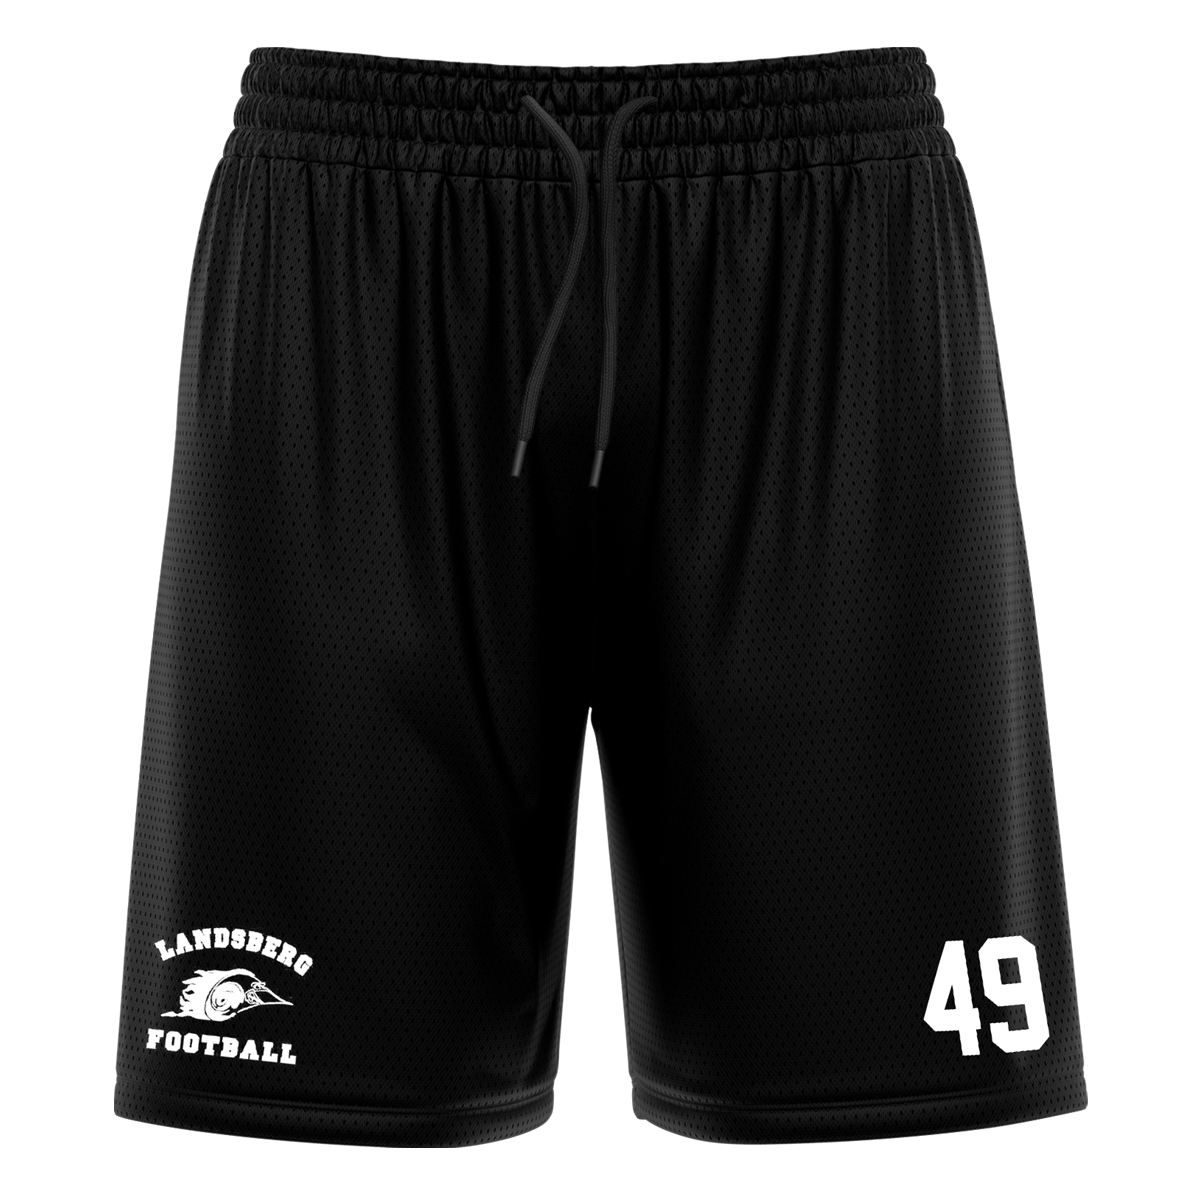 X-Press Training Short with Playernumber or Initials